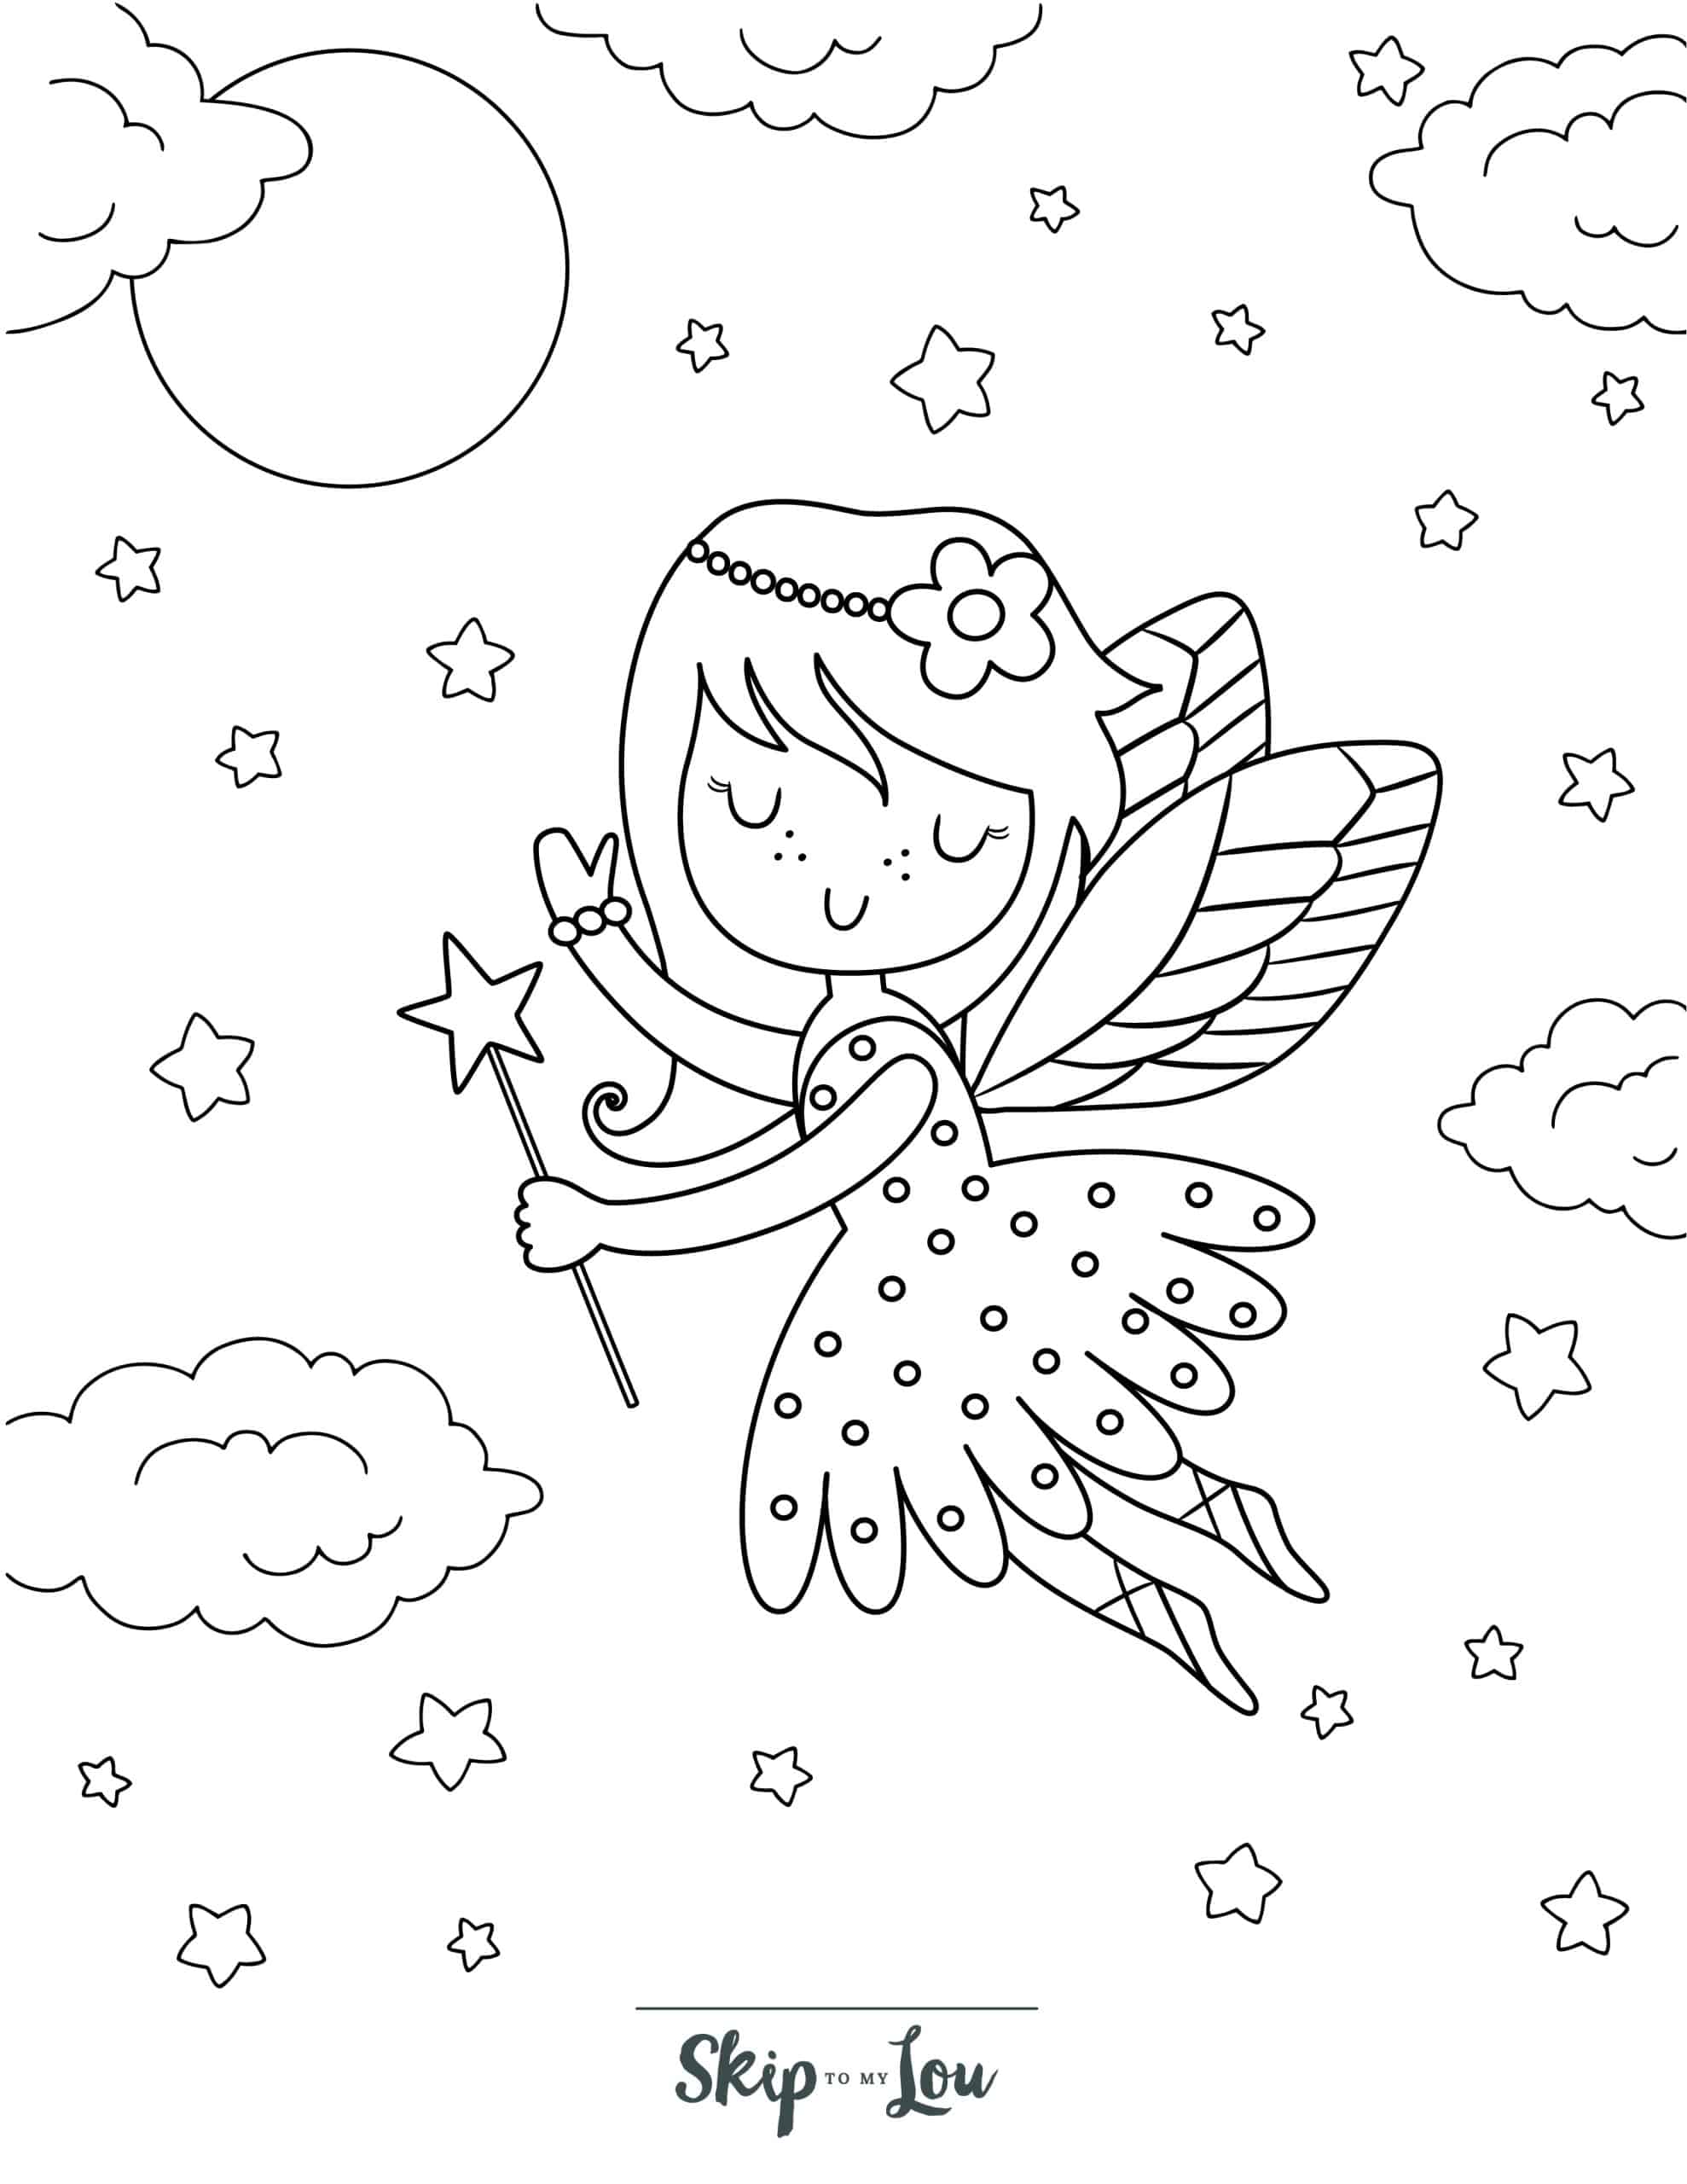 Celebrate Freedom with 4th of July: 180+ Free Coloring Pages 161